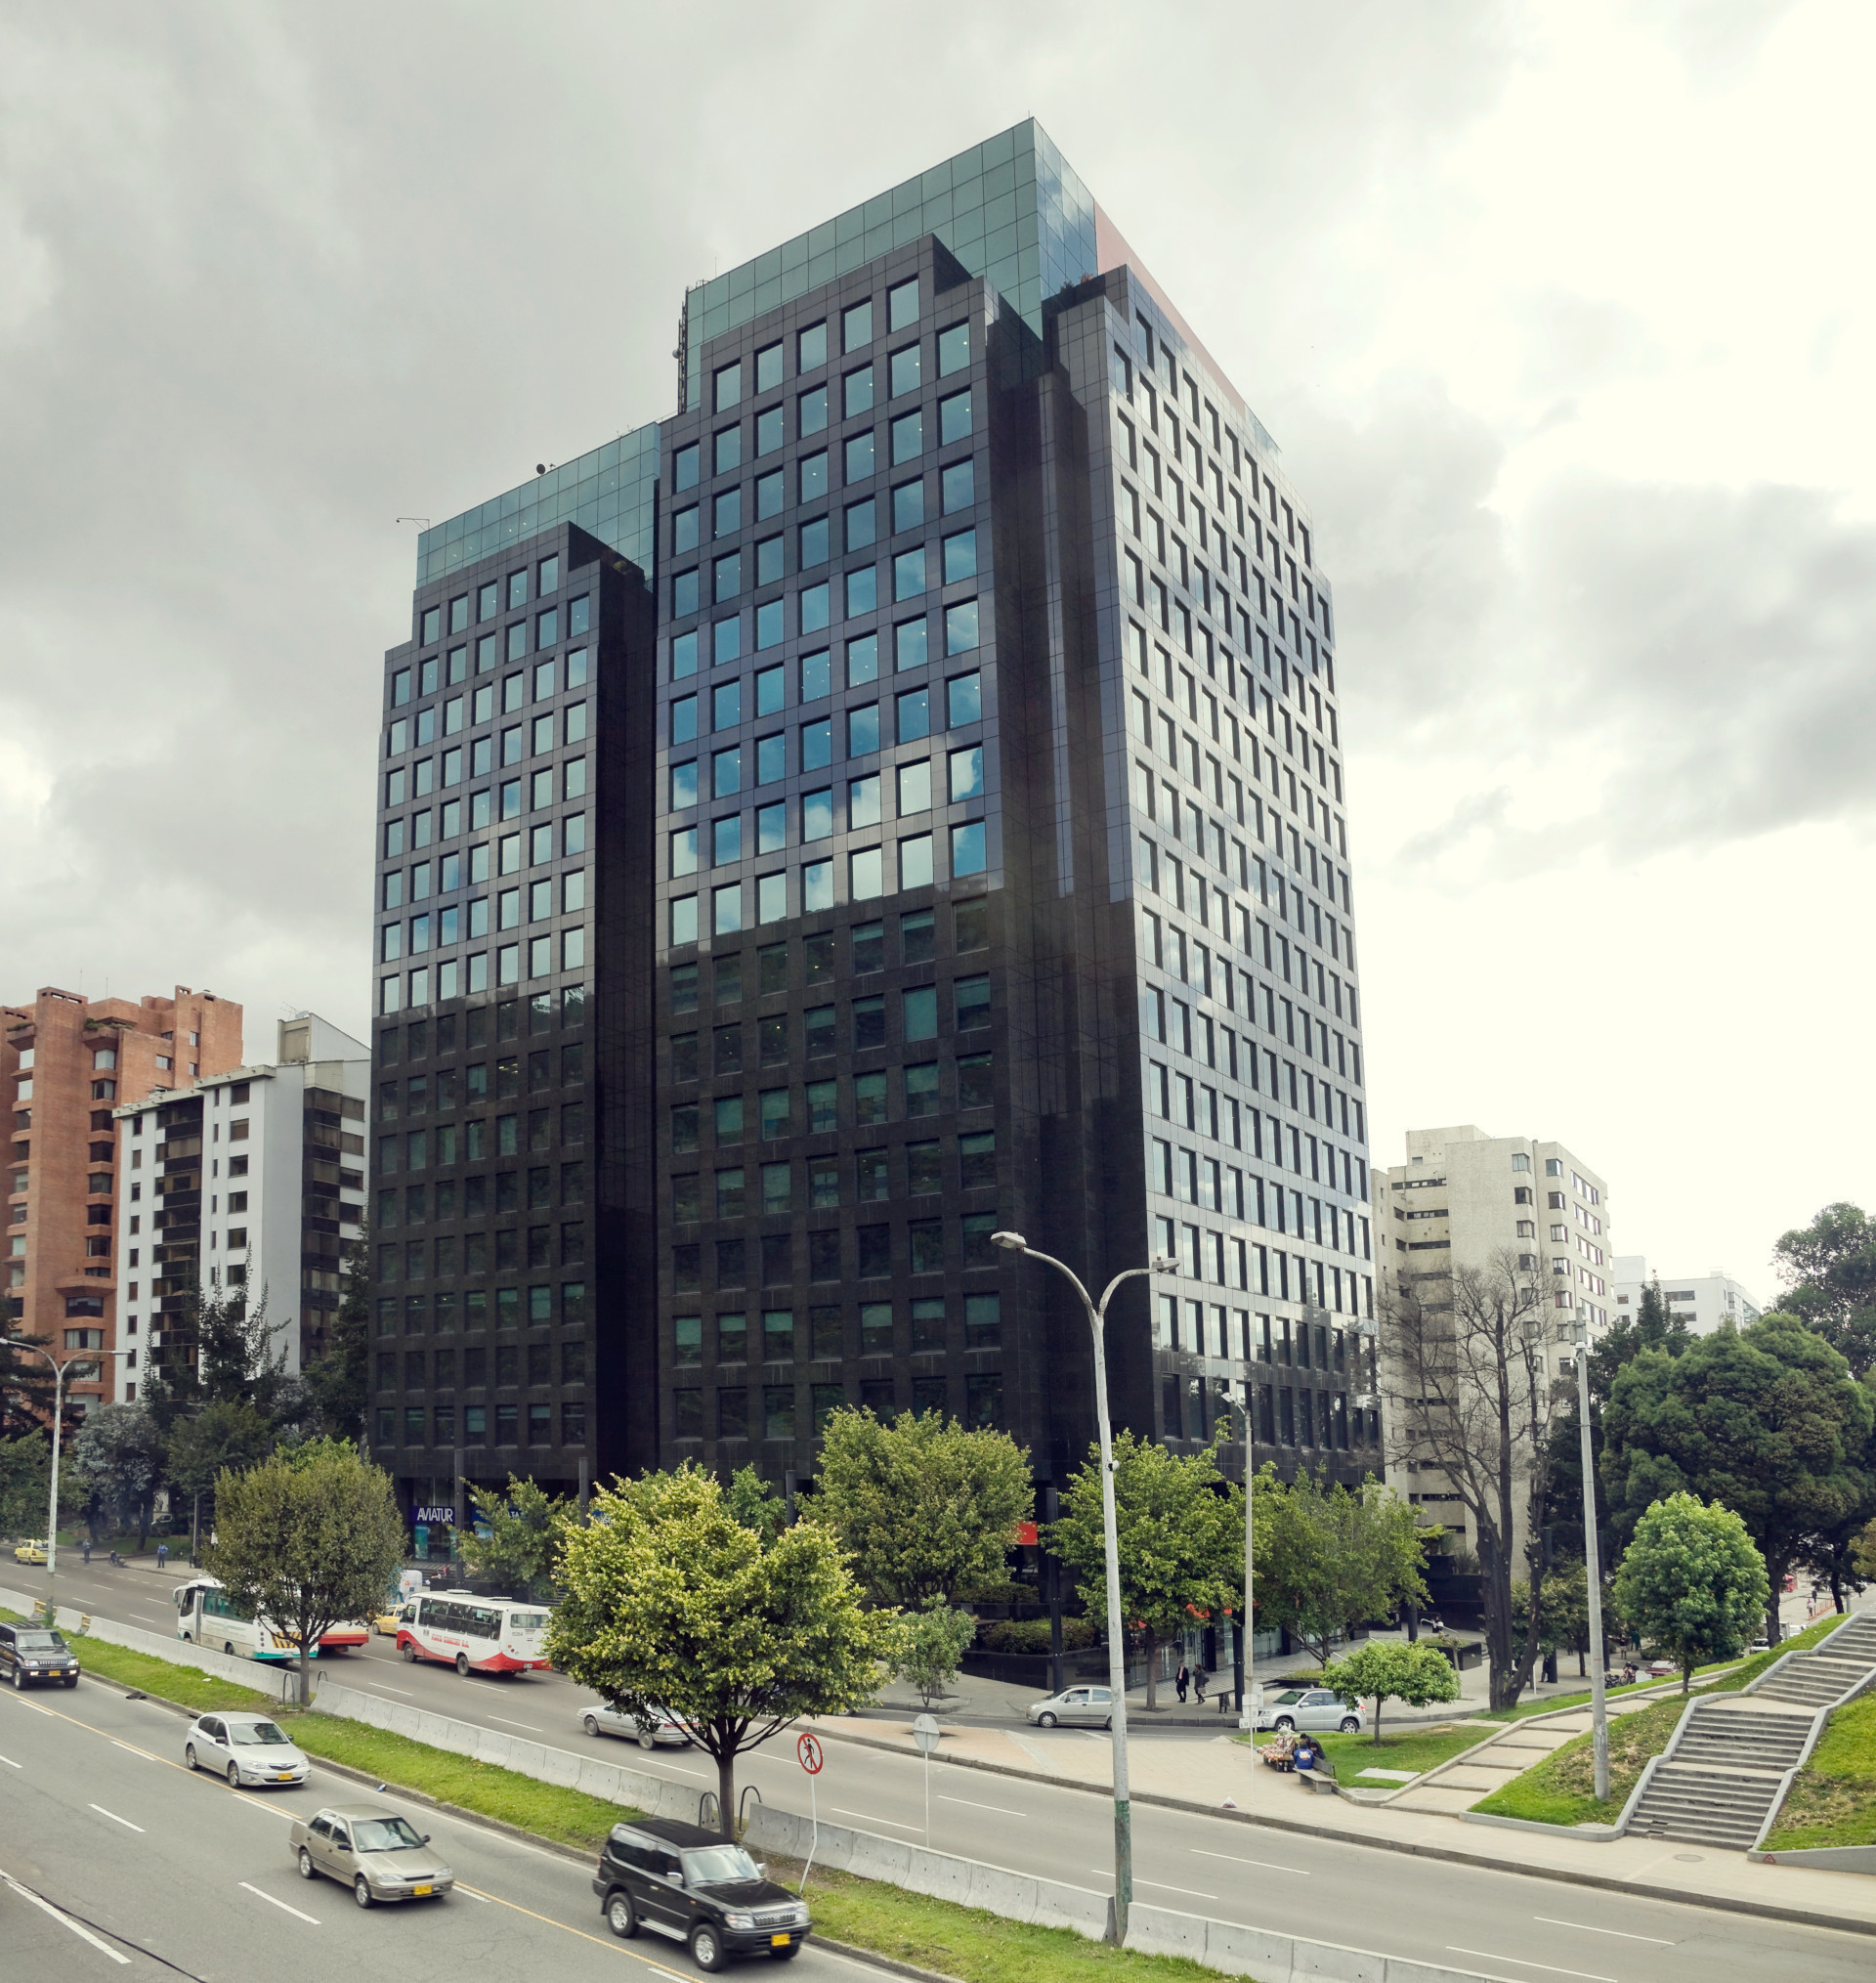 Capital Towers Real Estate Investment in Bogotá Colombia